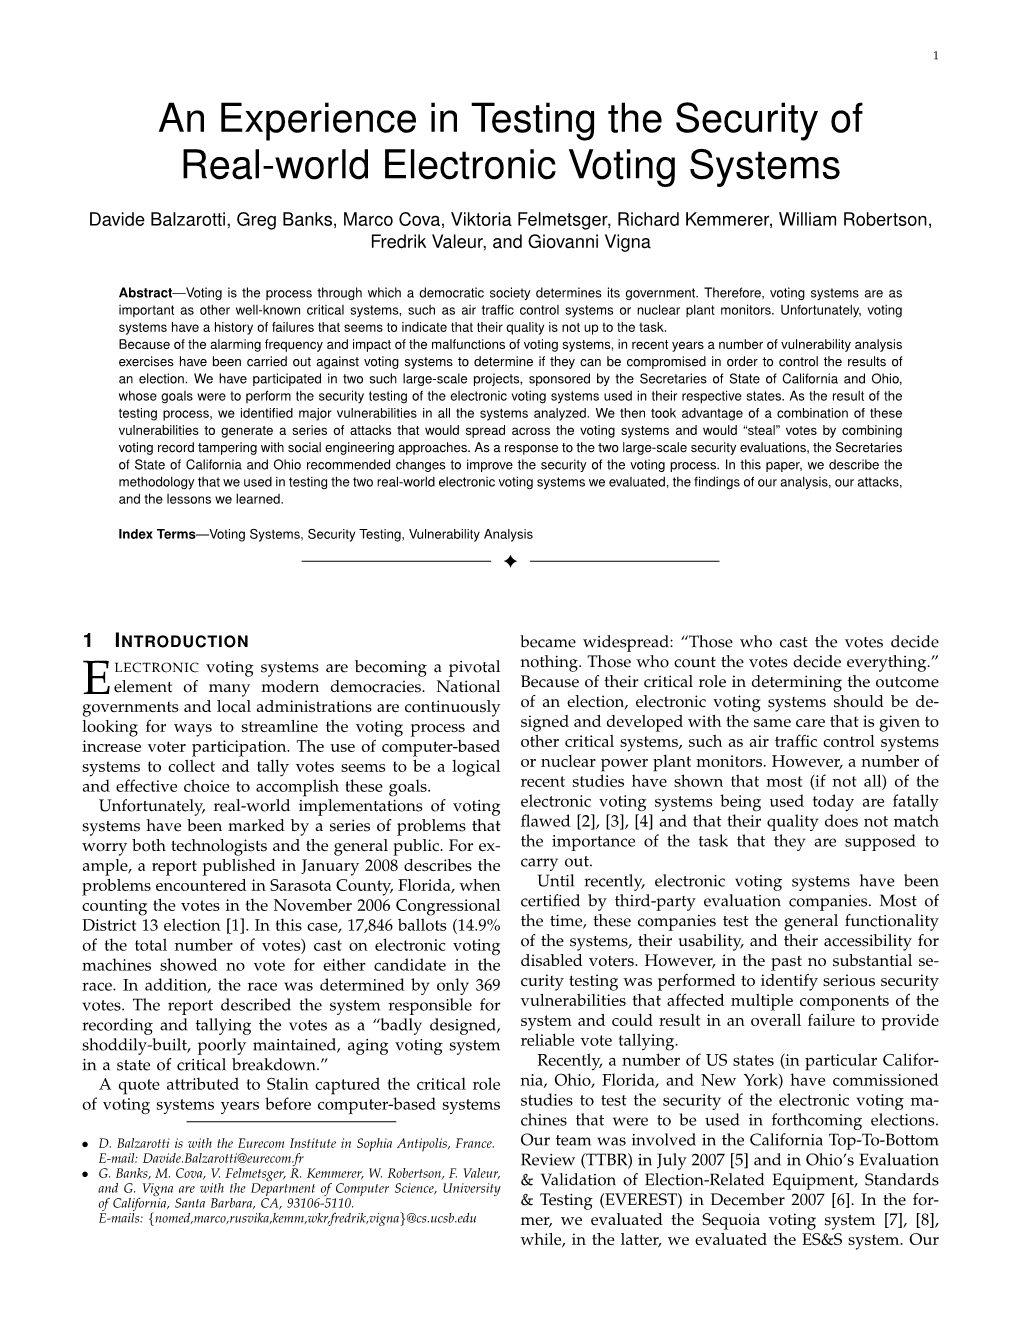 An Experience in Testing the Security of Real-World Electronic Voting Systems